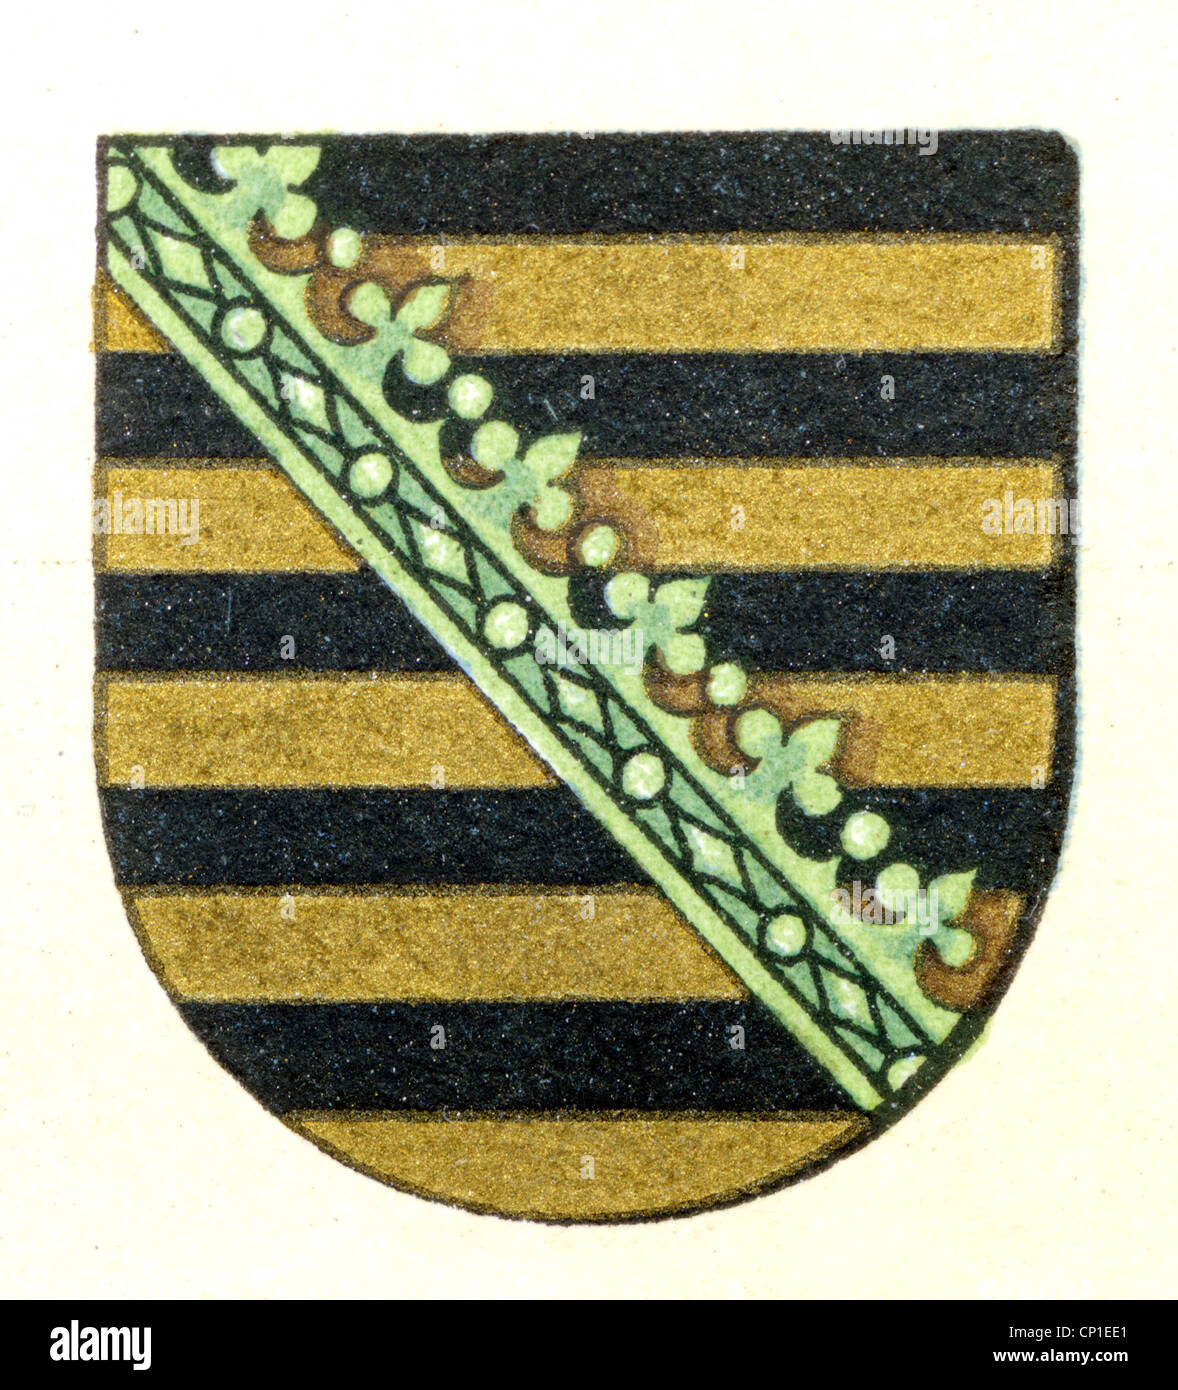 heraldry, coat of arms, Germany, Saxony, Wettiner arms, chromolithograph, circa 1895, Additional-Rights-Clearences-Not Available Stock Photo